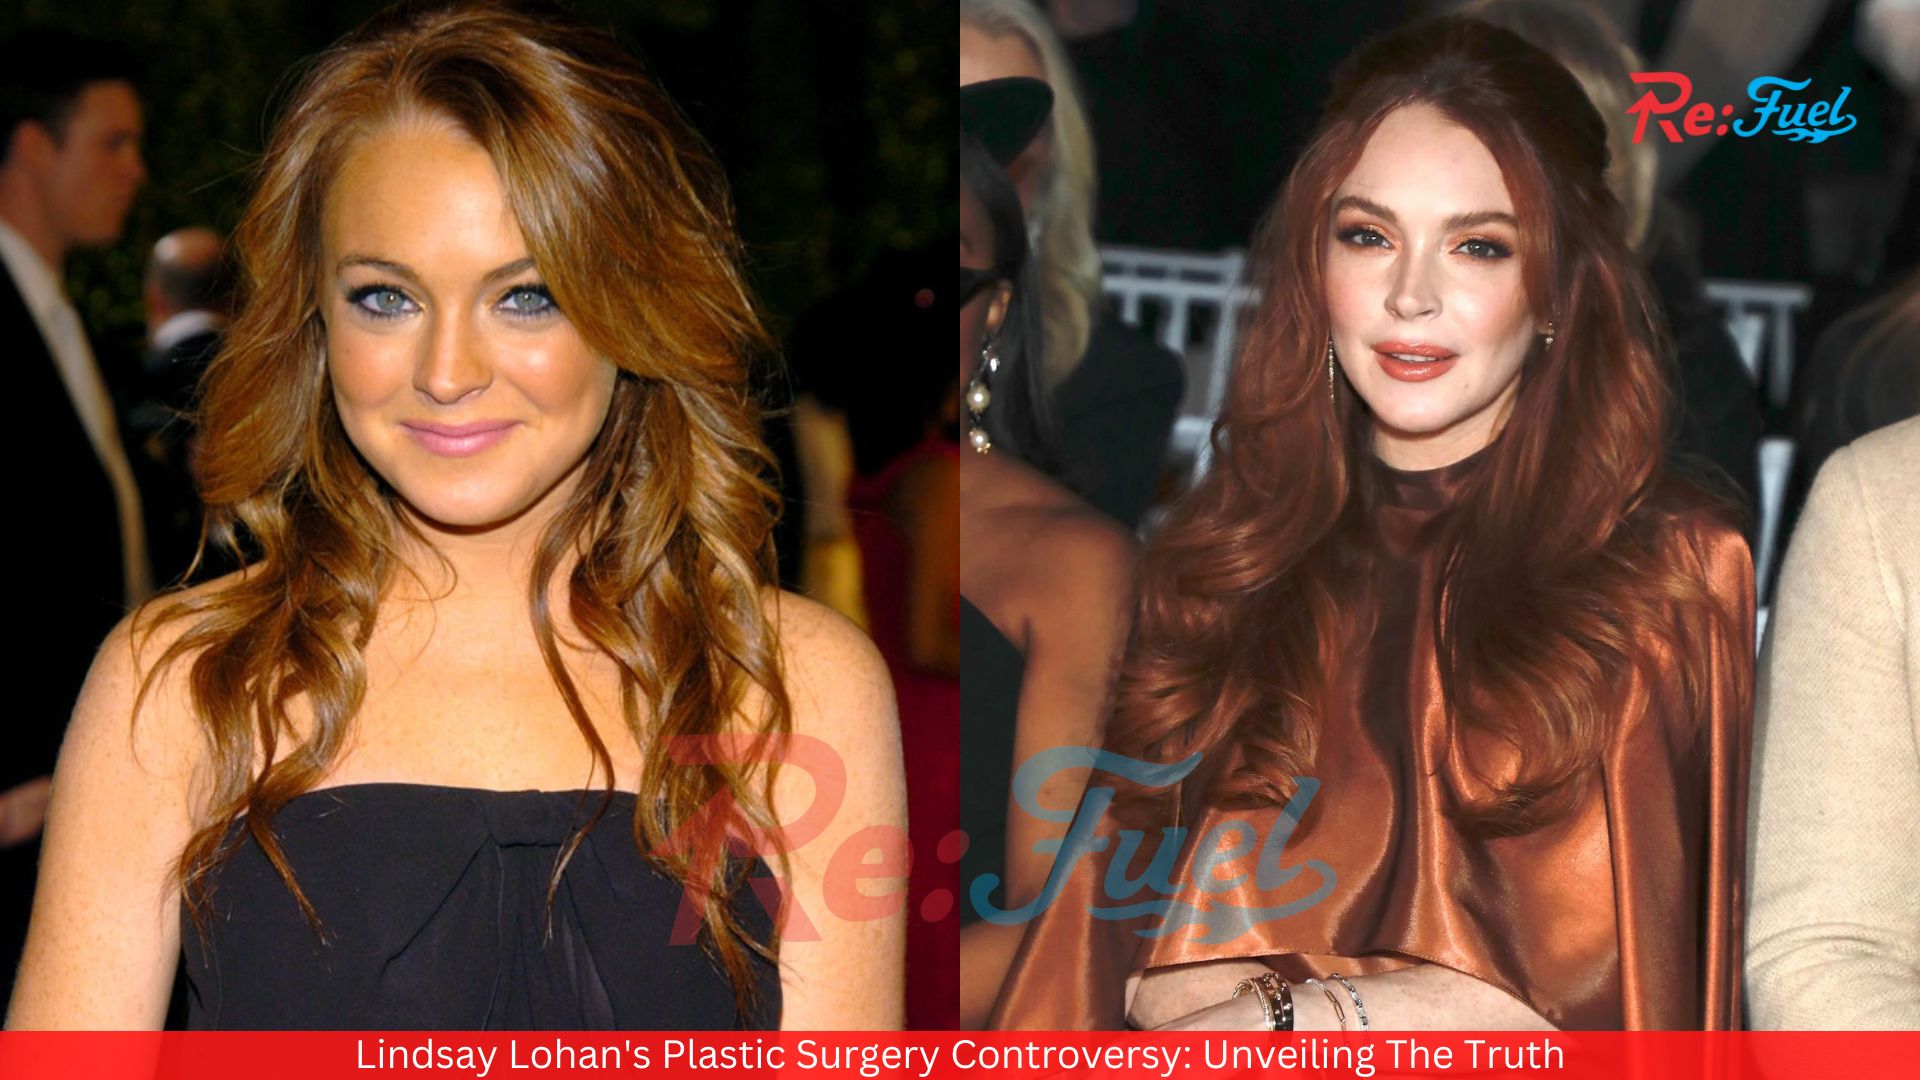 Lindsay Lohan's Plastic Surgery Controversy: Unveiling The Truth